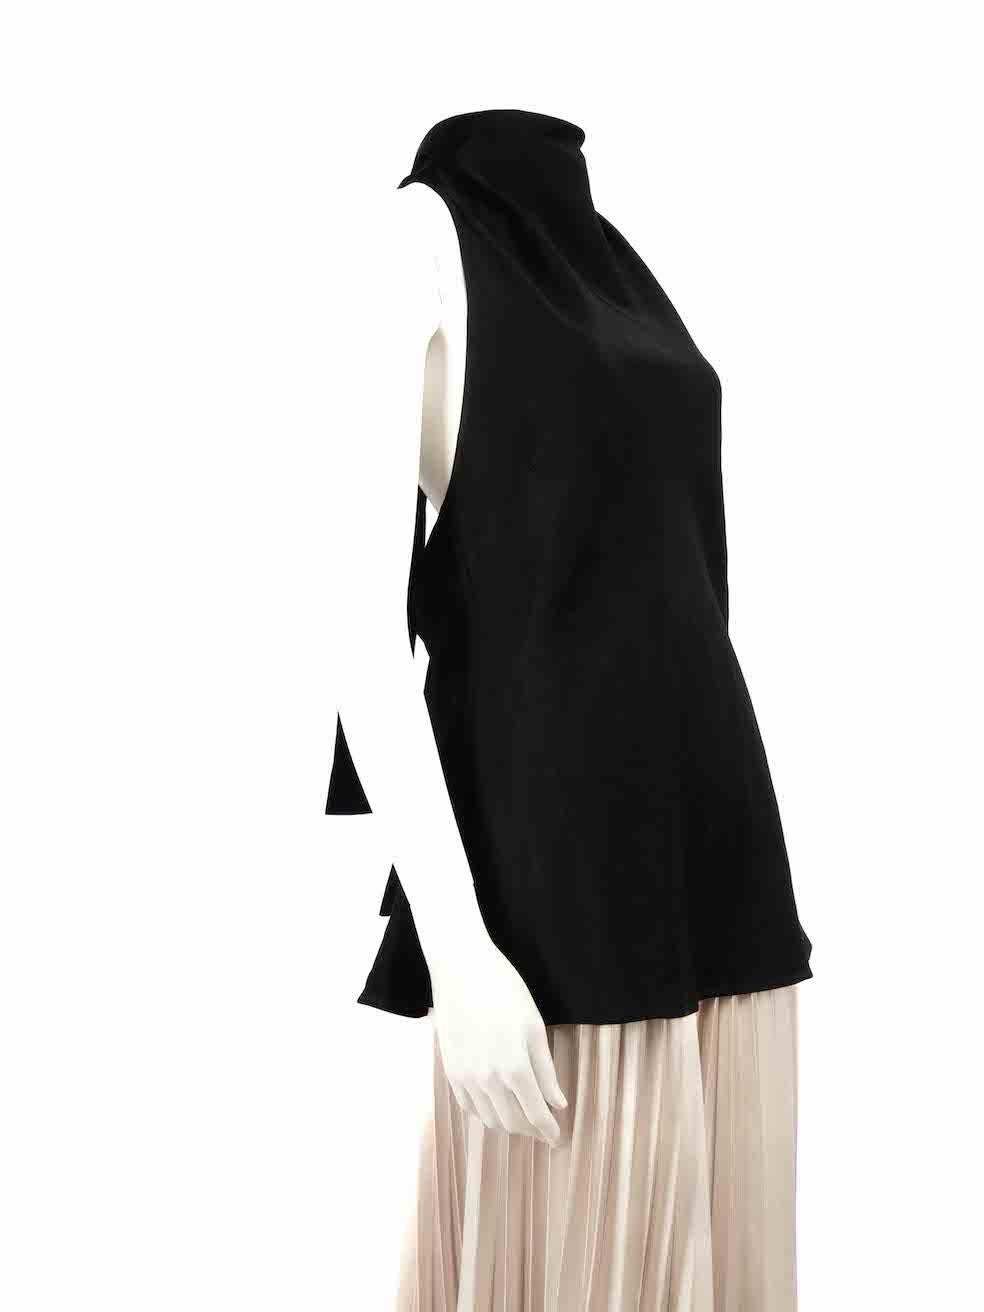 CONDITION is Good. General wear to top is evident. Moderate signs of wear to the front with plucks to the weave on this used ELLERY designer resale item.
 
 
 
 Details
 
 
 Black
 
 Synthetic
 
 Top
 
 Sleeveless
 
 Mock neck
 
 Back button